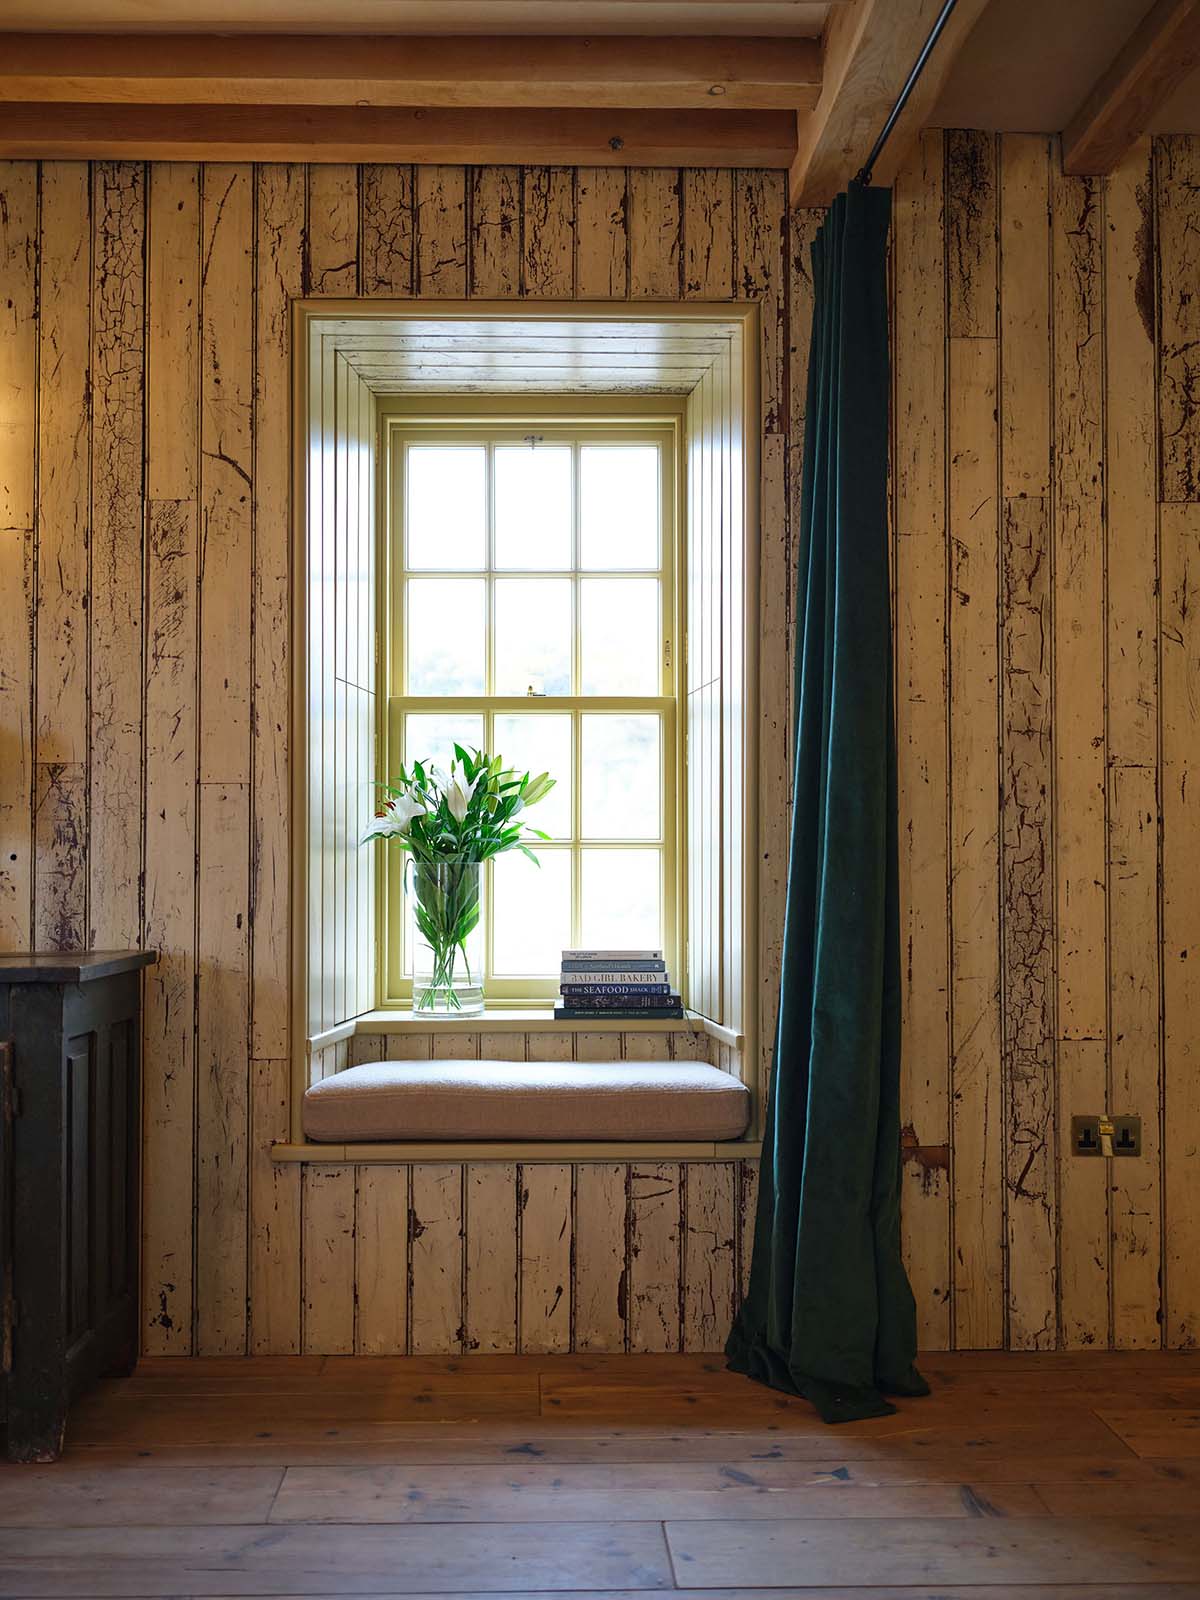 Rodel House on the Isle of Harris features a little reading nook by the window